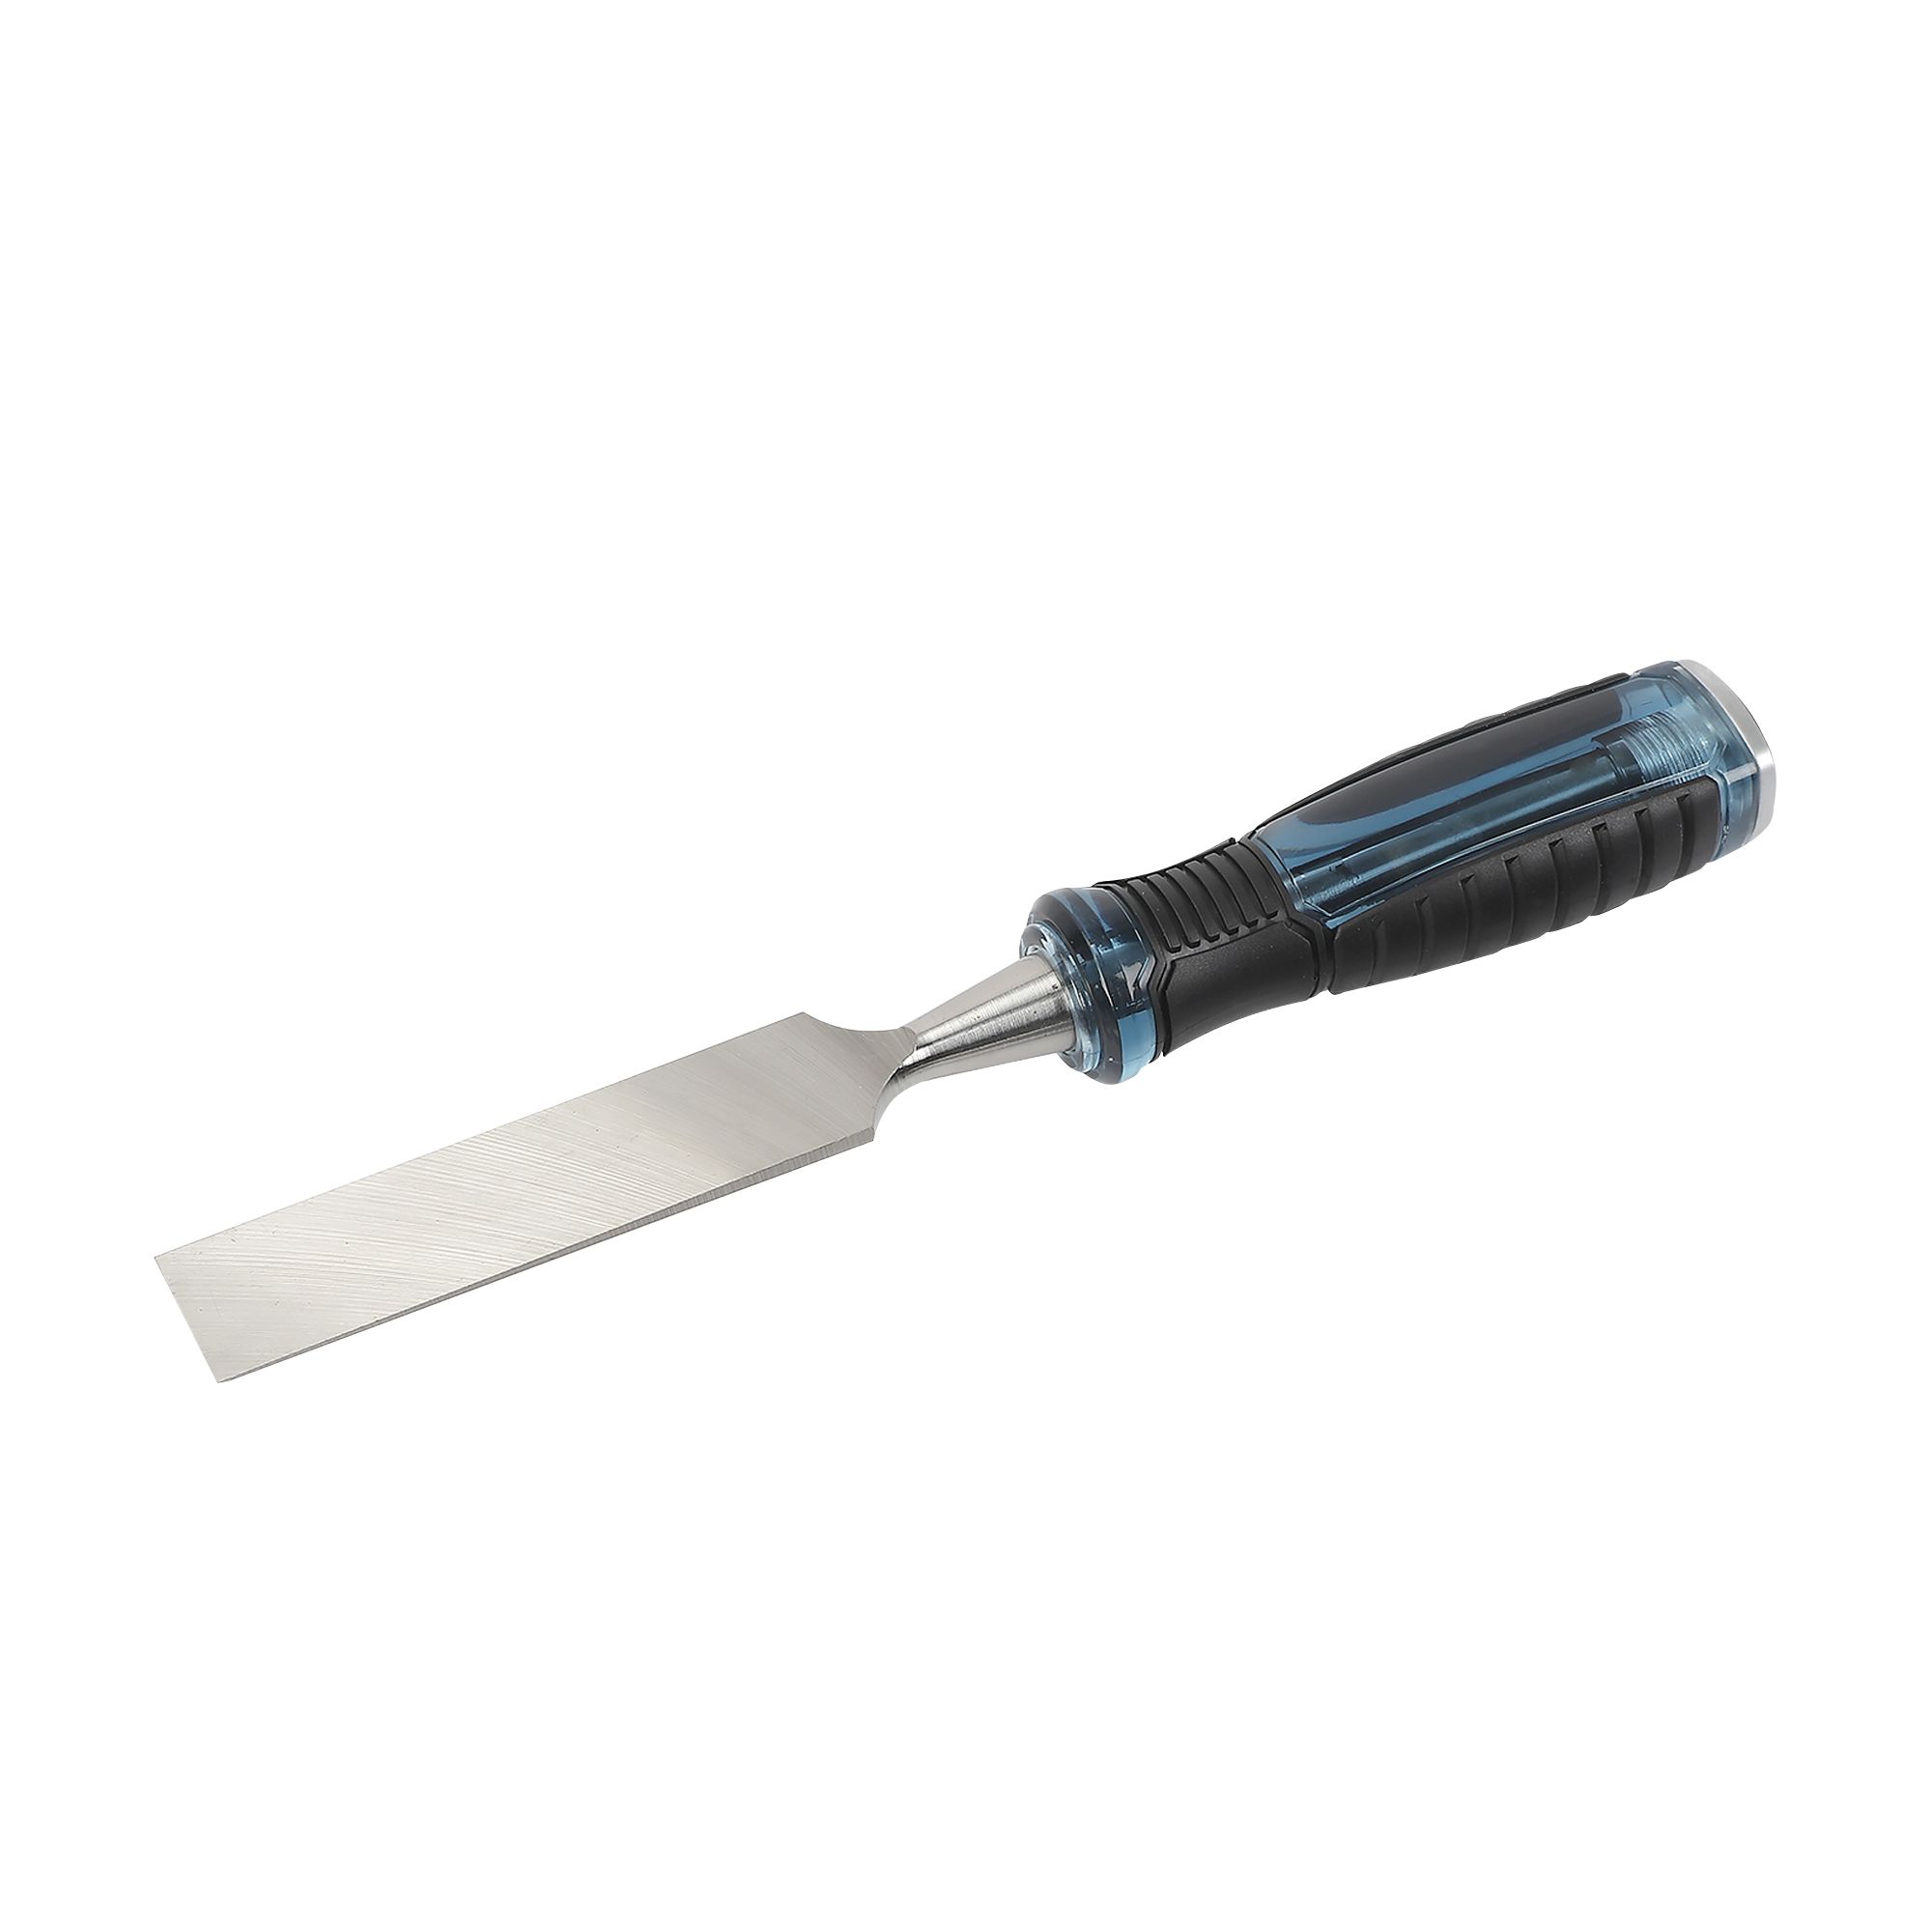 Erbauer 25mm Wood chisel